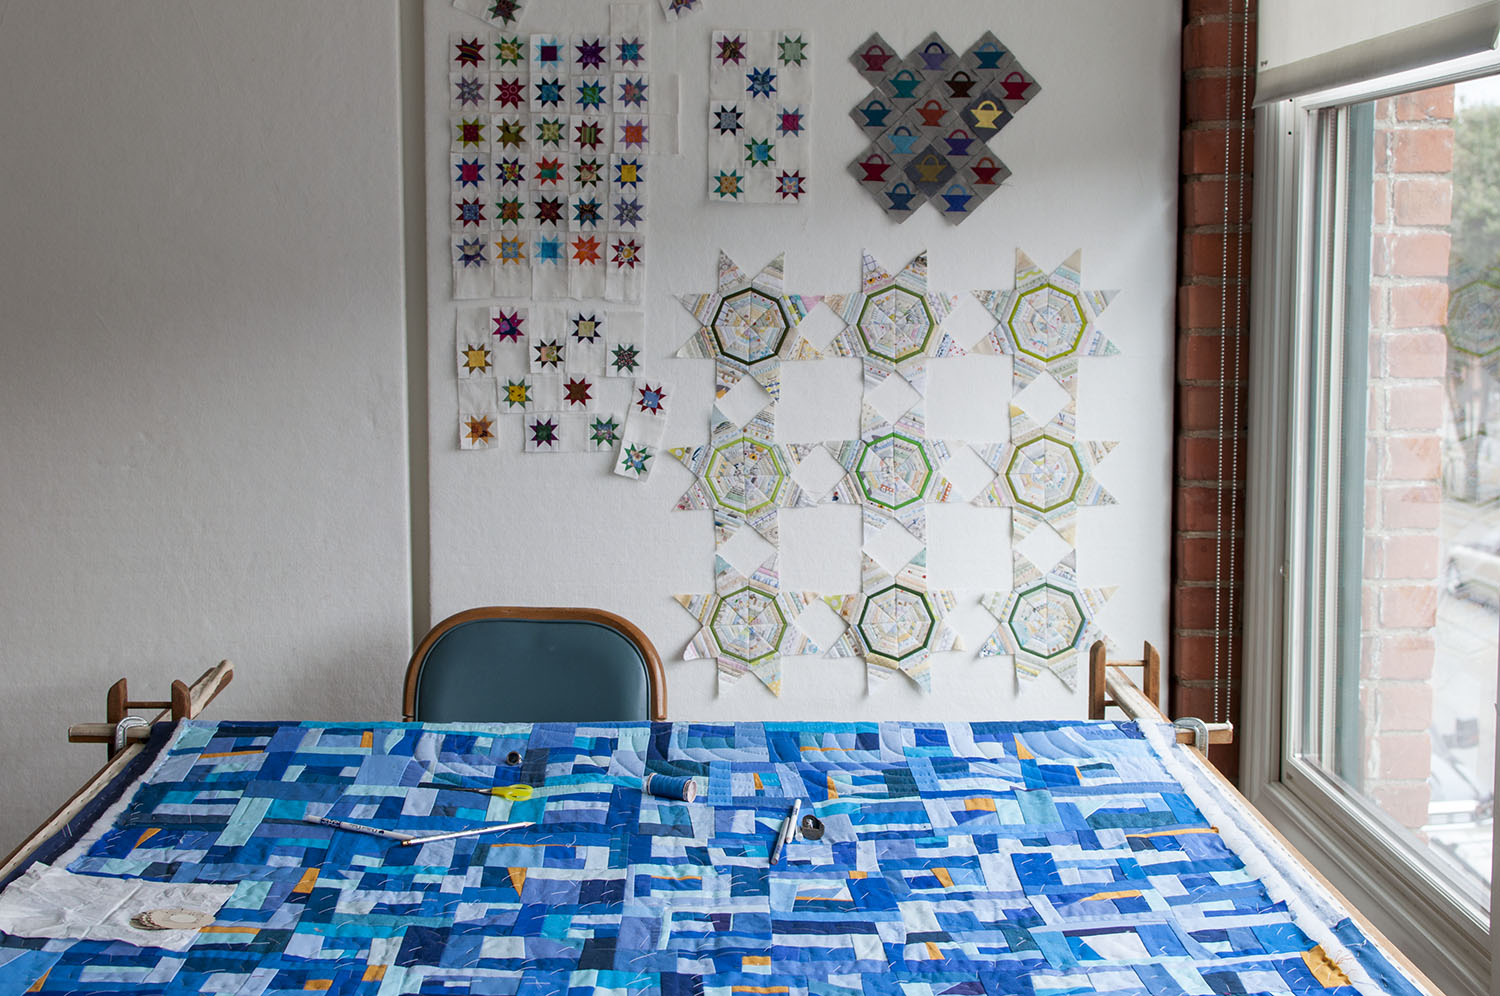 The Feisty Quilter: The Hand Quilting Frame